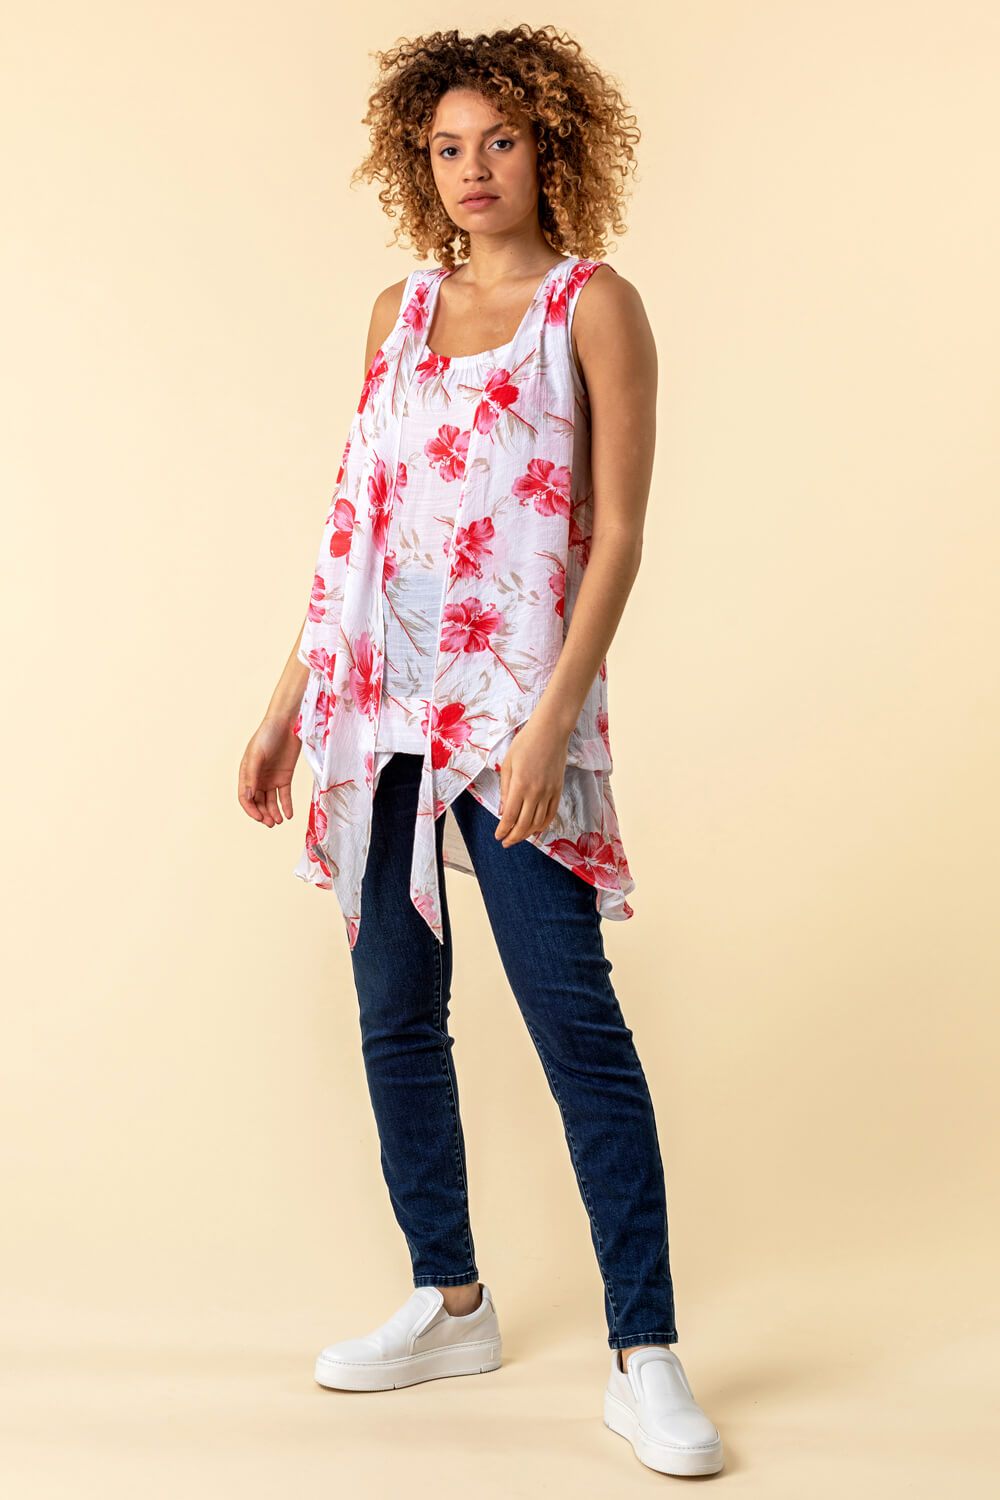 Red Floral Print Crinkle Tunic Top, Image 3 of 4